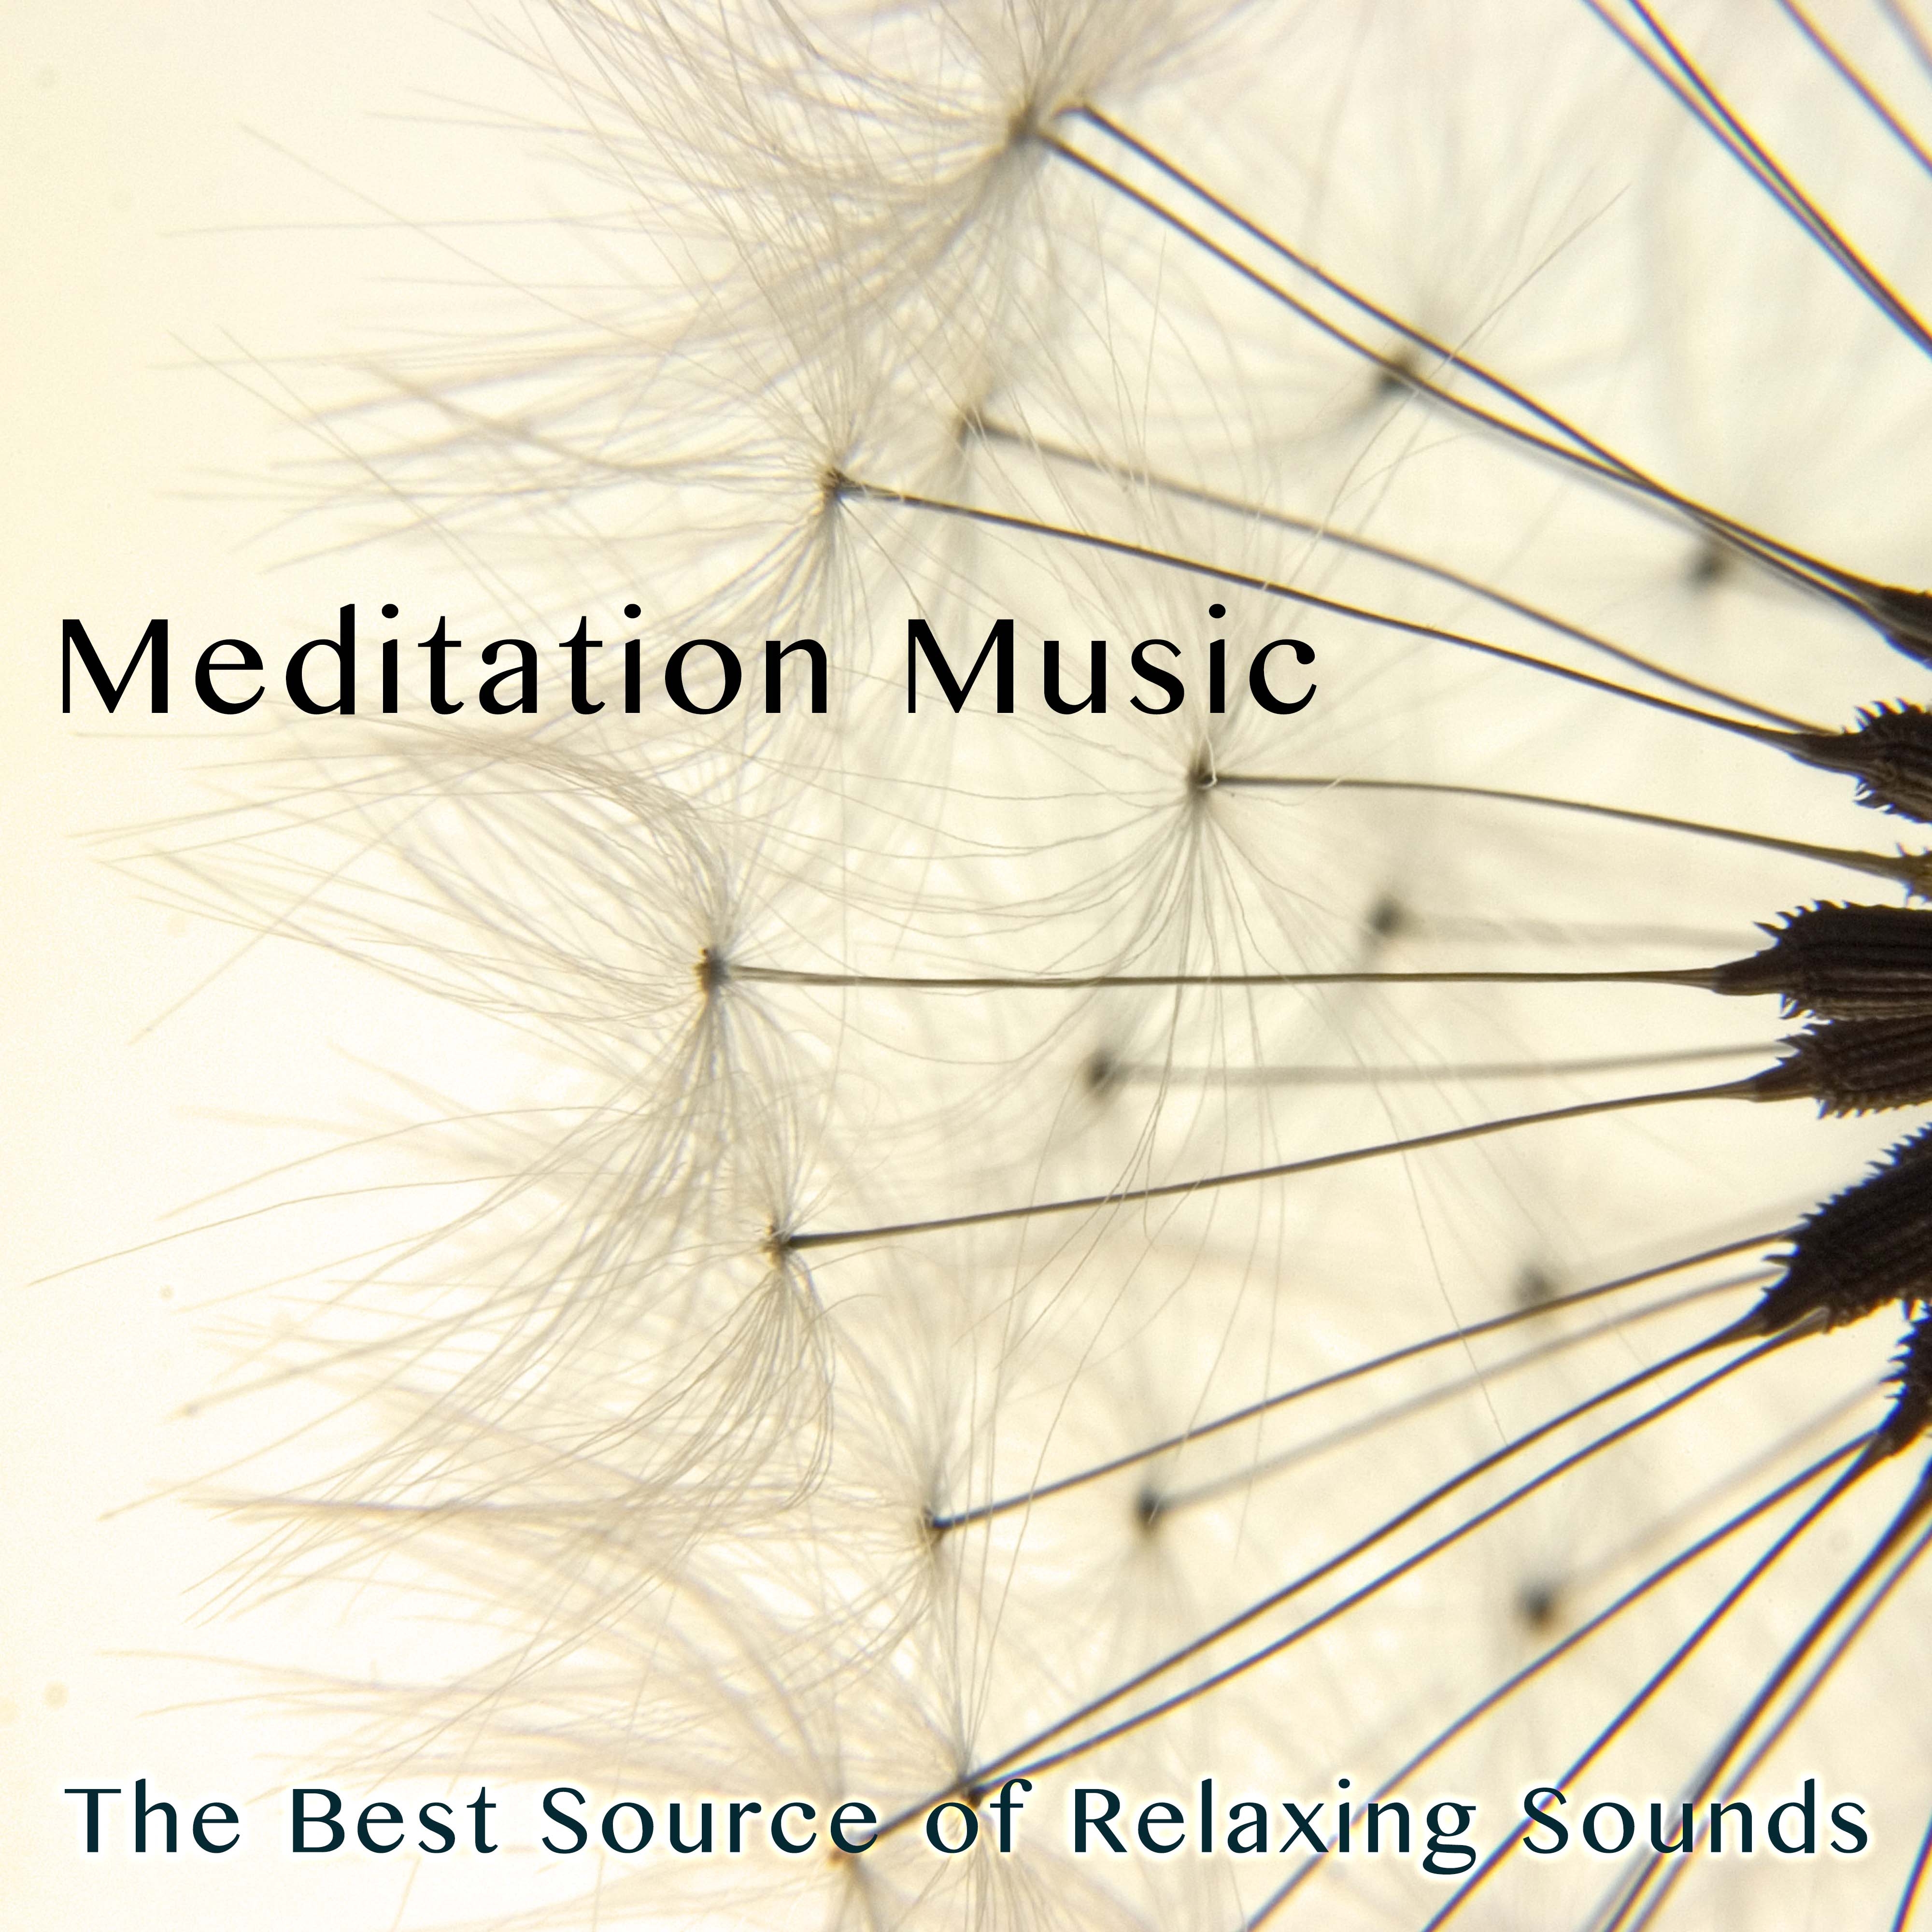 Meditation Music - The Best Source of Relaxing Sounds